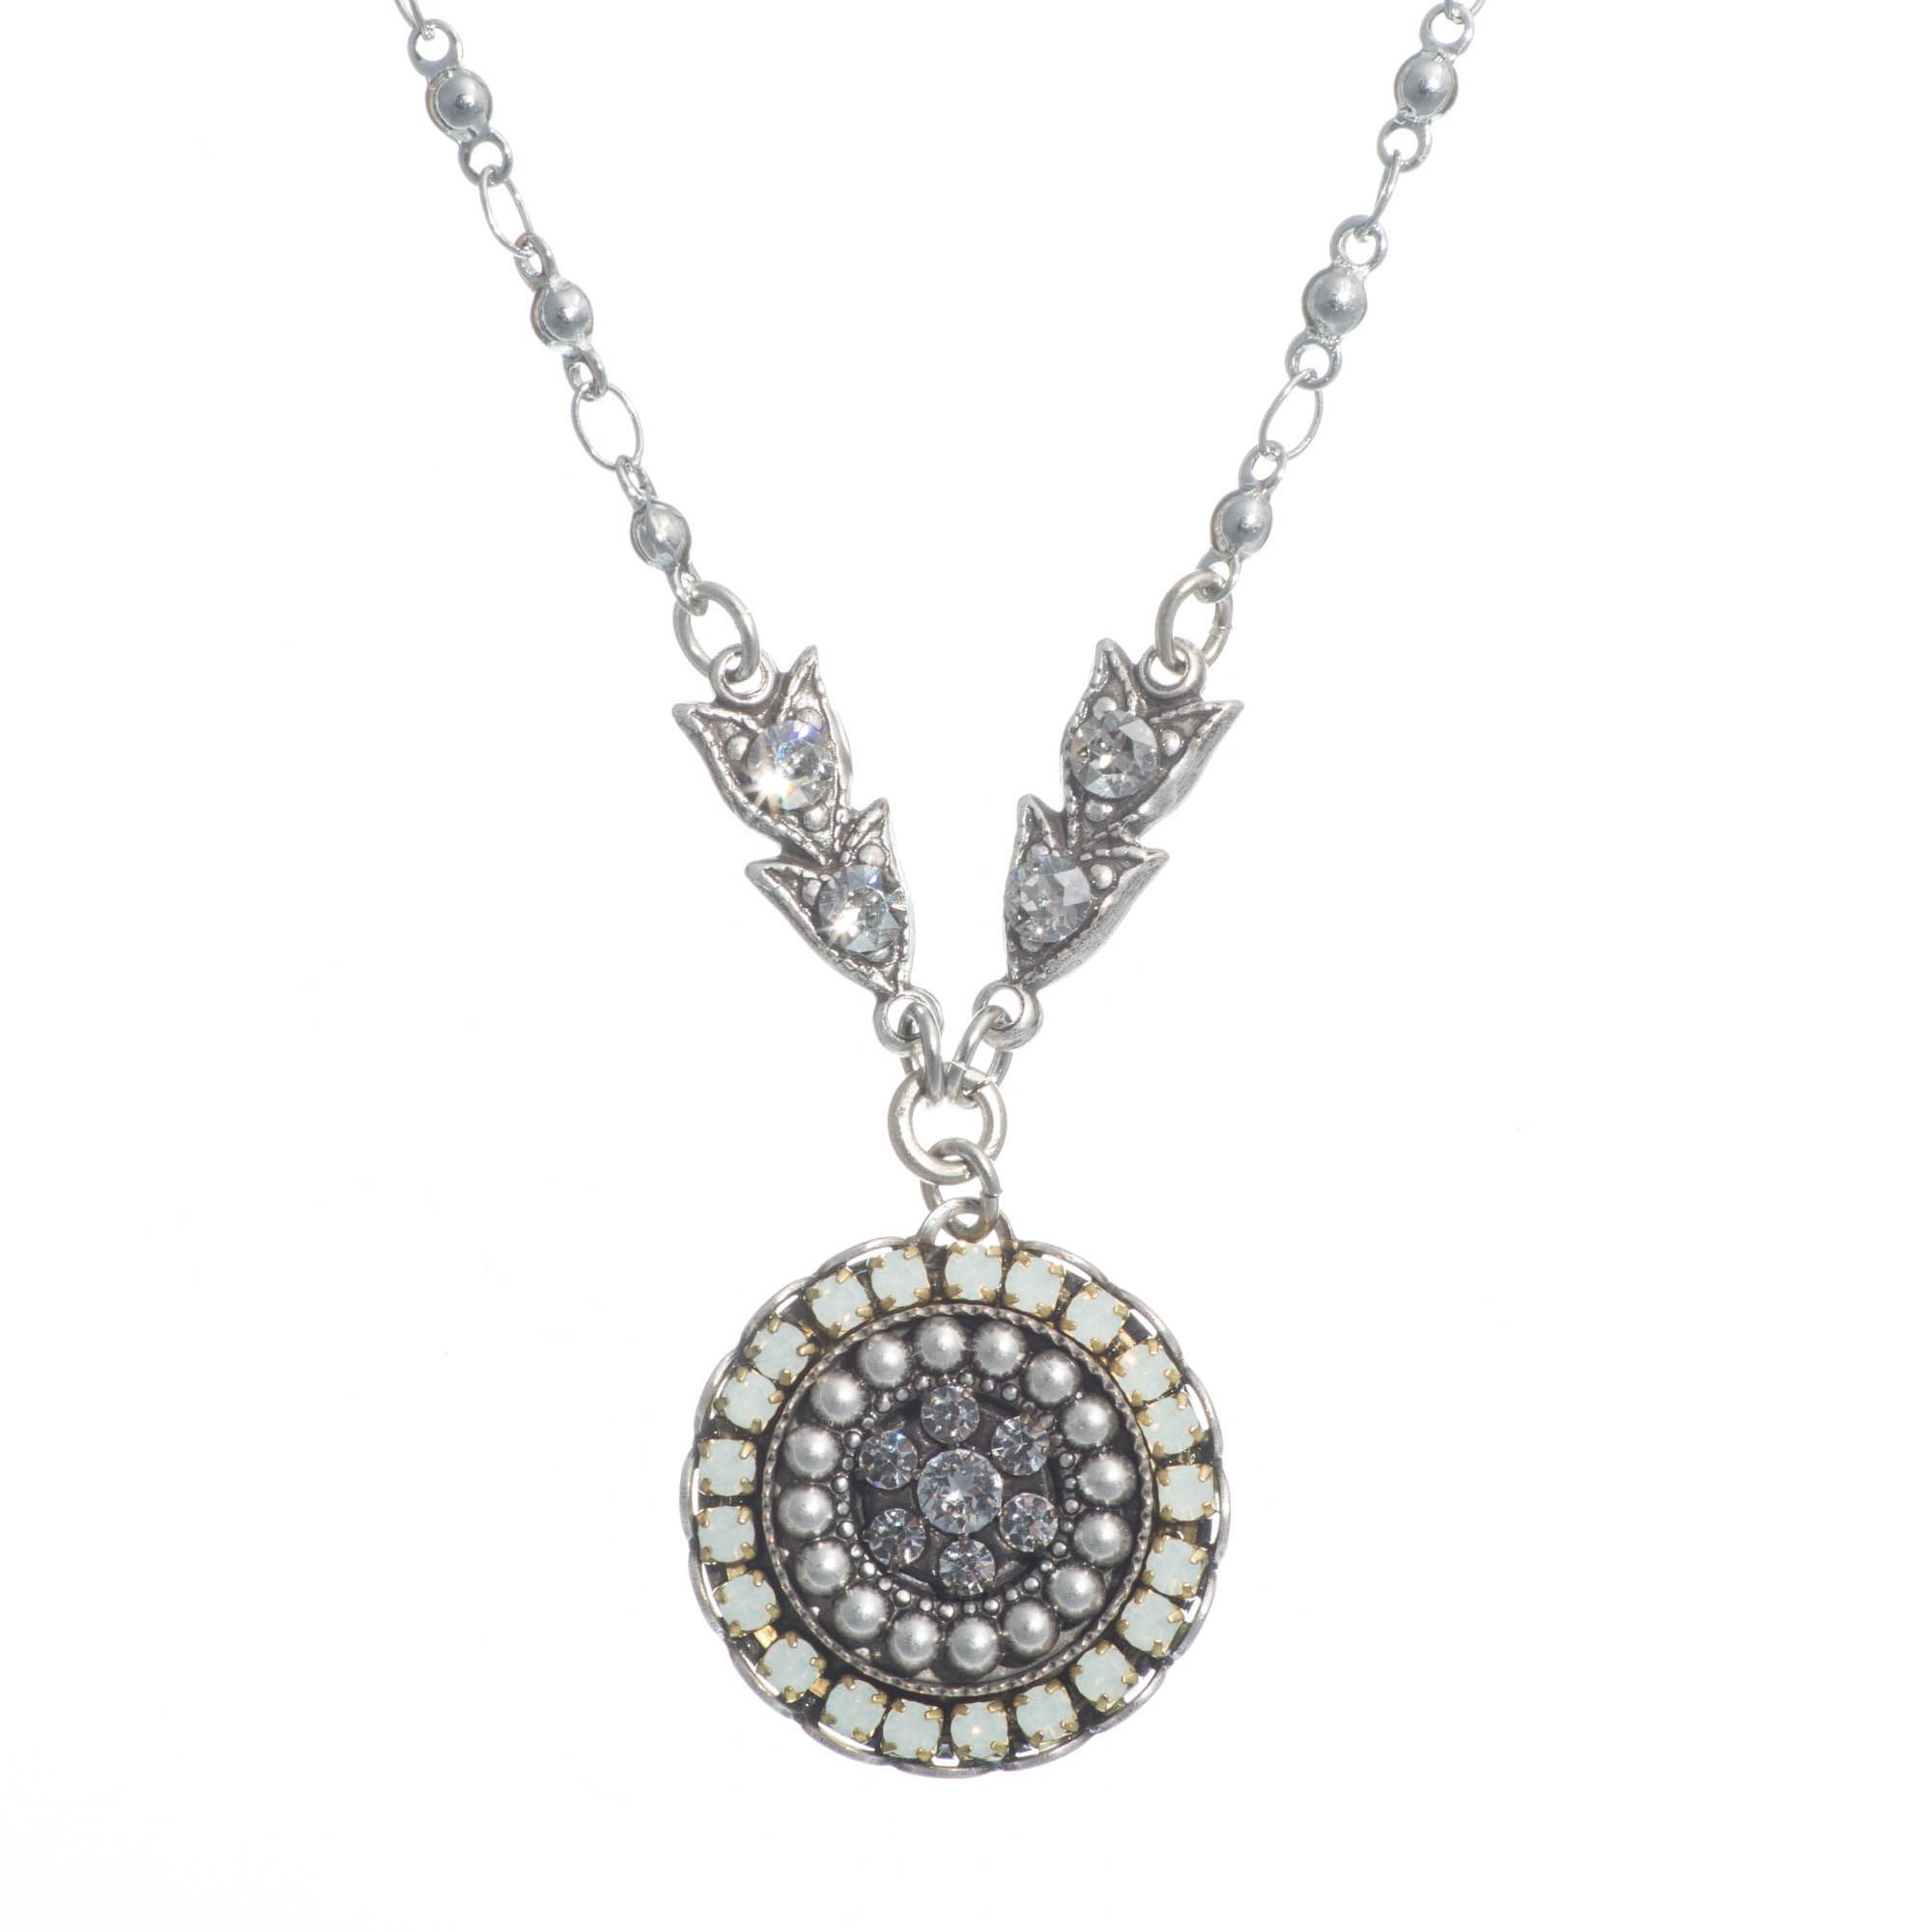 Clara Beau Dazzling Silver White Opal Round Mosaic Crystal Pendant Necklace Throughout Most Recently Released Dazzling Locket Pendant Necklaces (View 8 of 25)